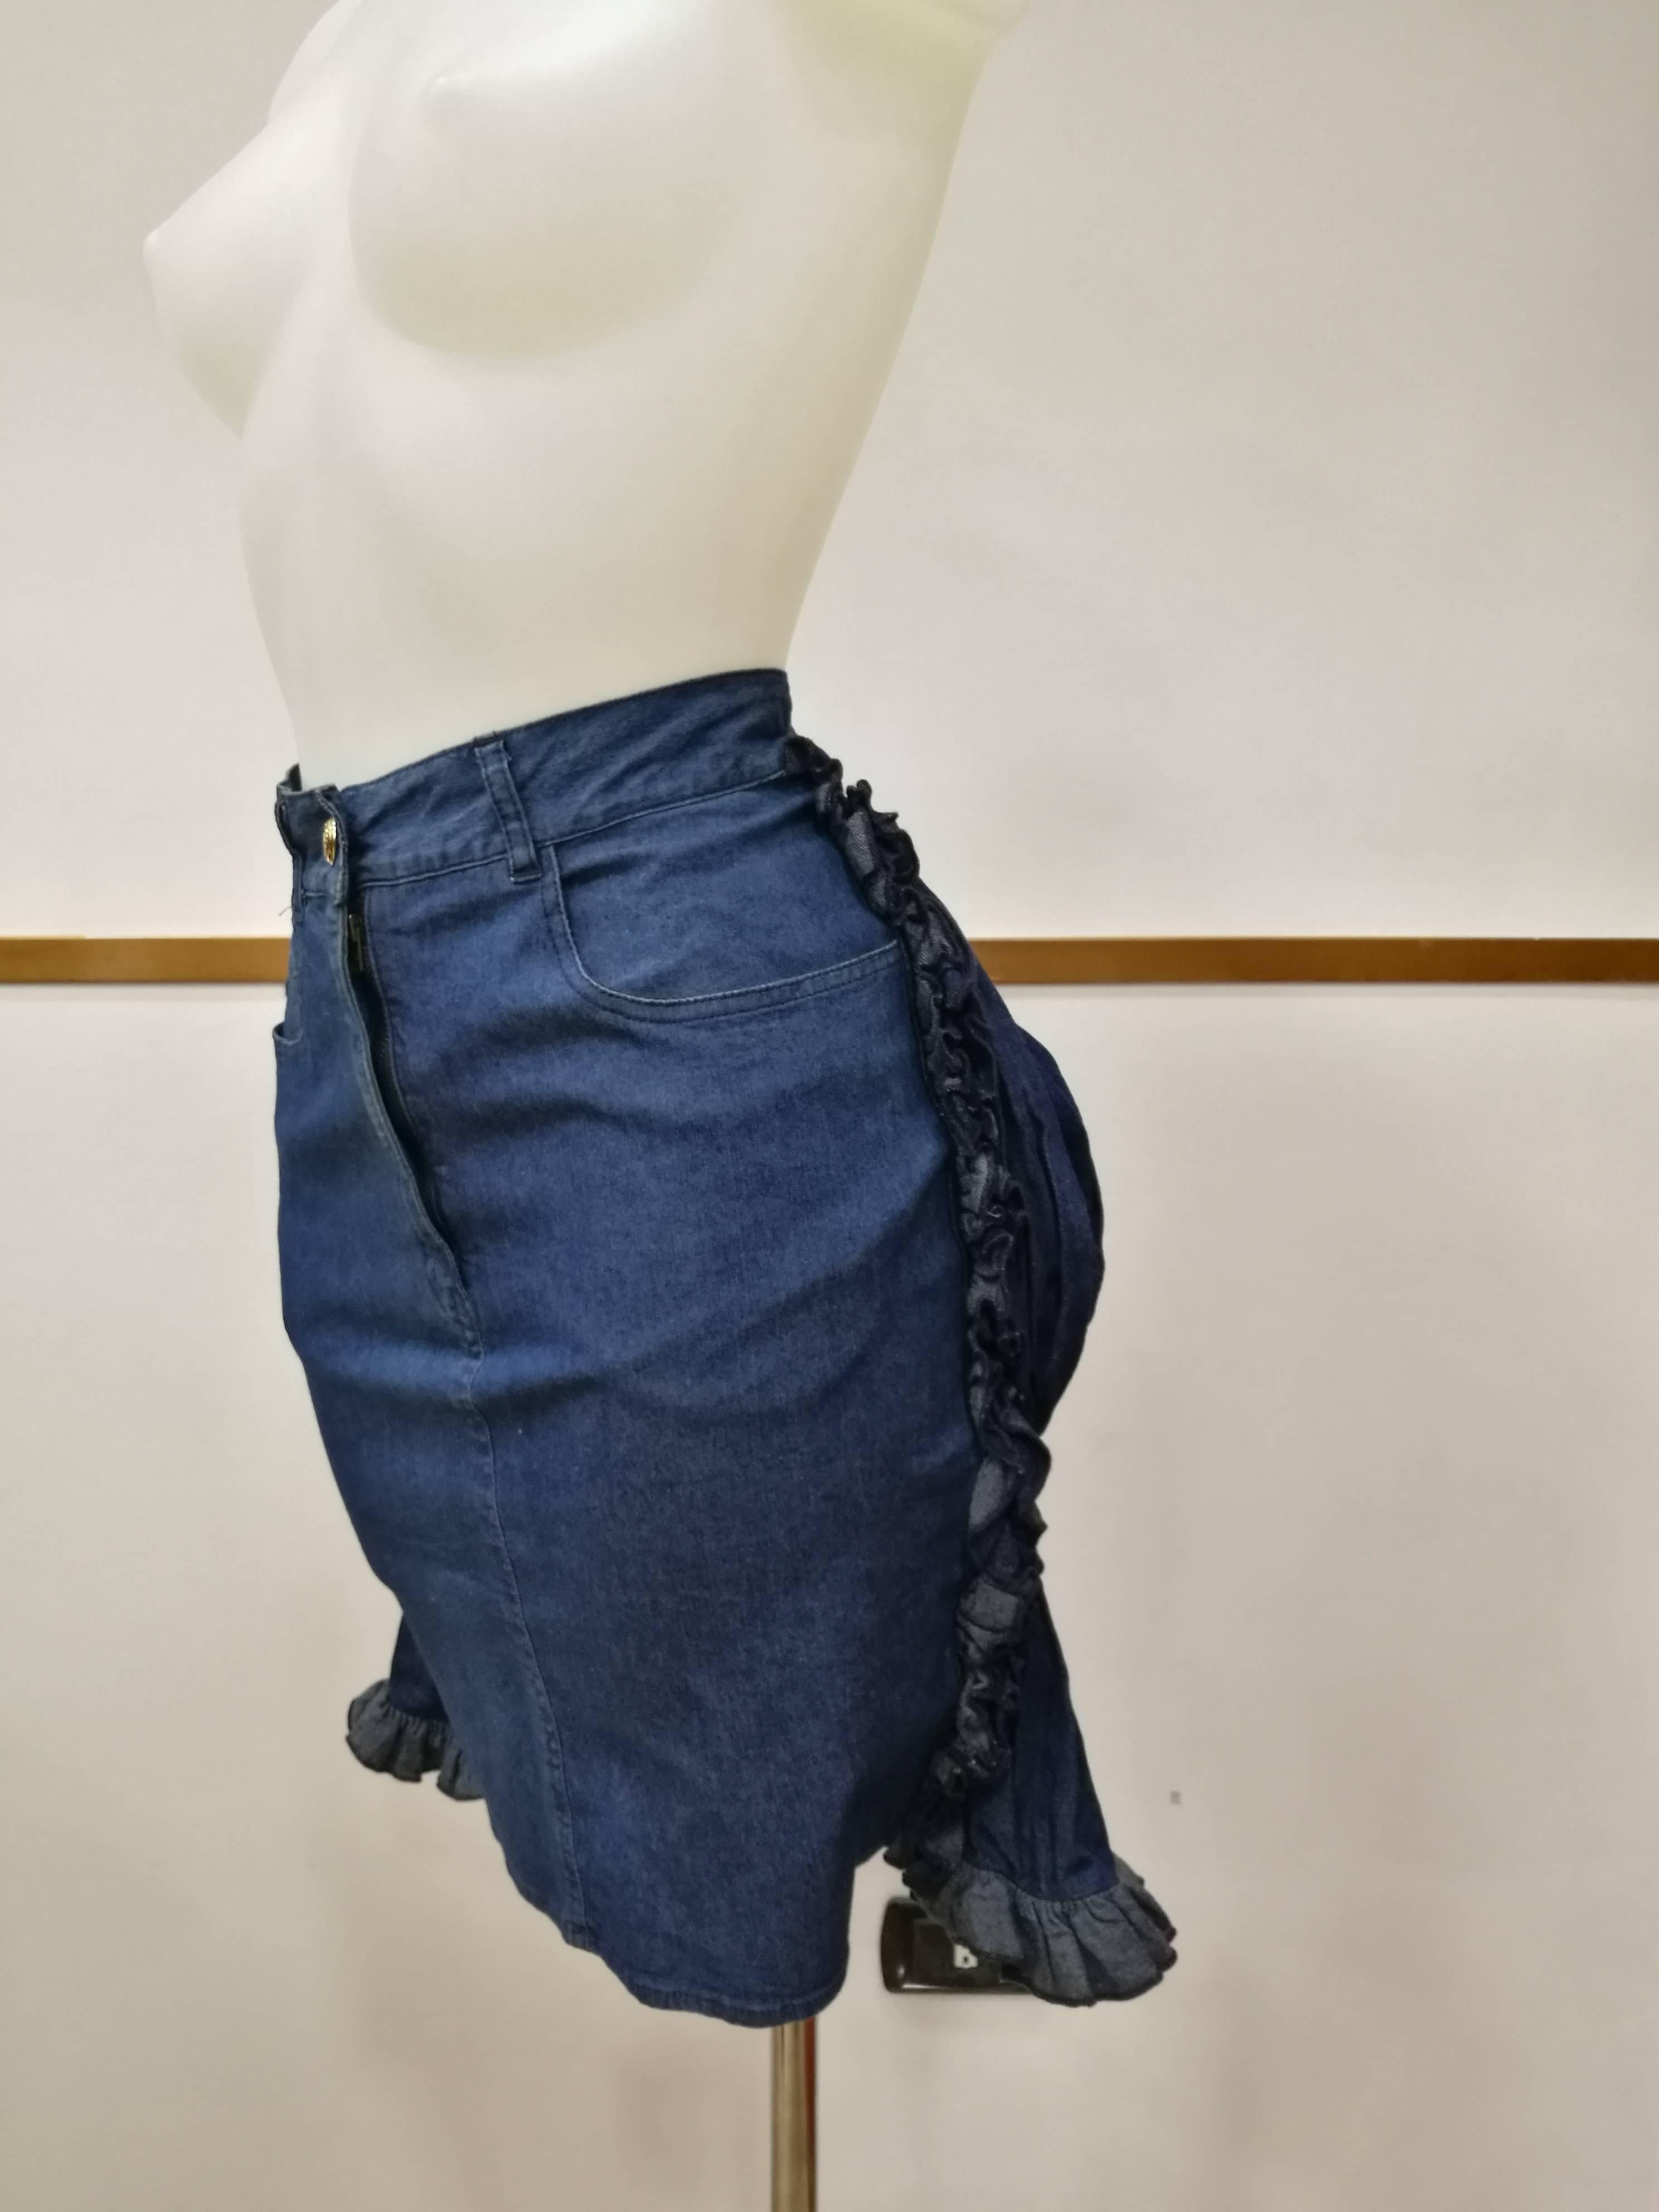 1990s Iconic Moschino Faux-Cul denim Mini Skirt

Moschino Jeans Iconic skirt totally made in italy in italian size range 42

Composition: Cotton , elastane

